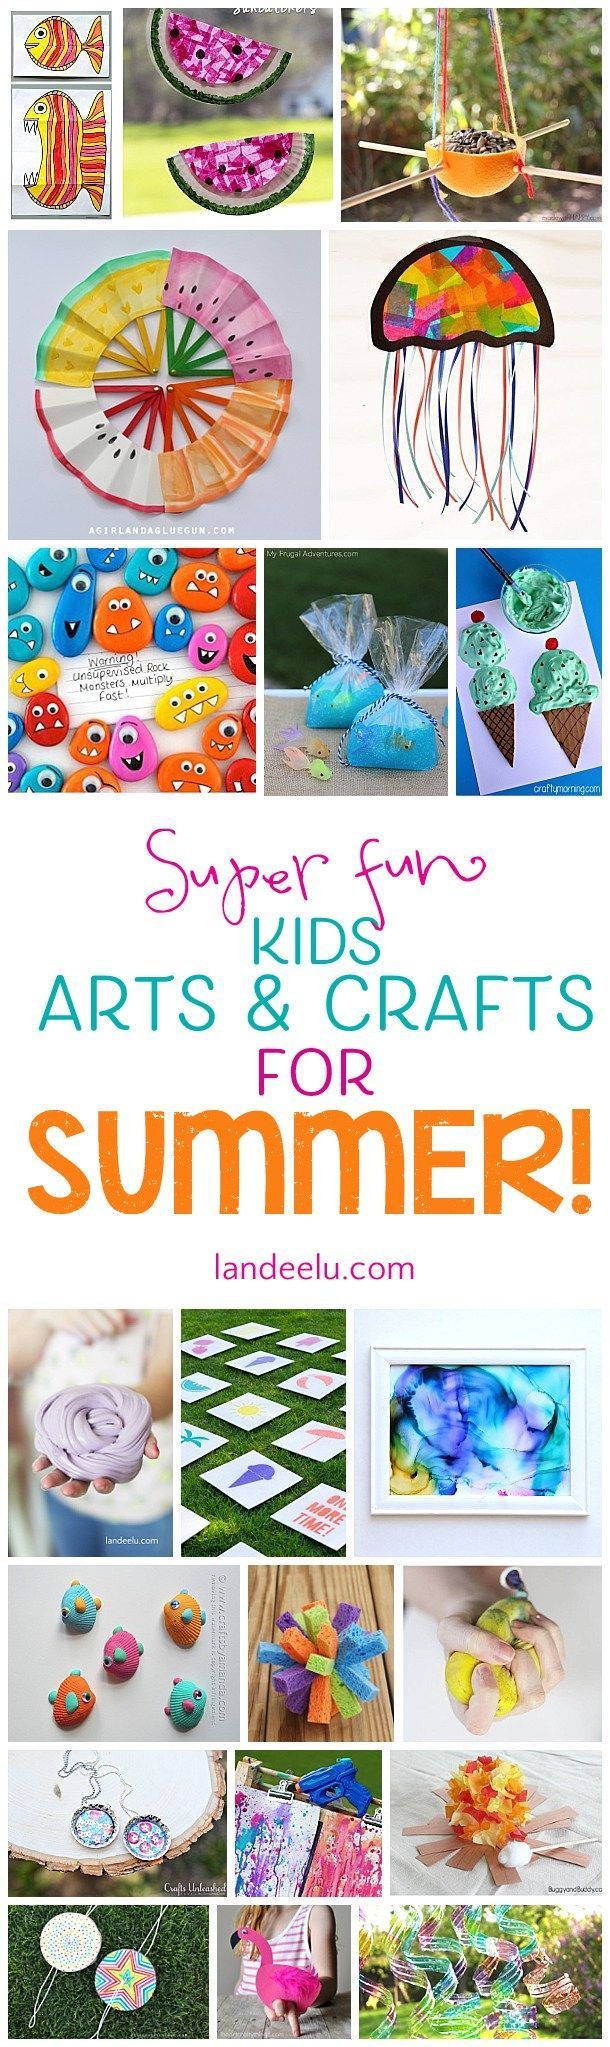 So many fun summer craft ideas for kids to keep their minds and creativity going all summer long! I love the ice cream paintings!